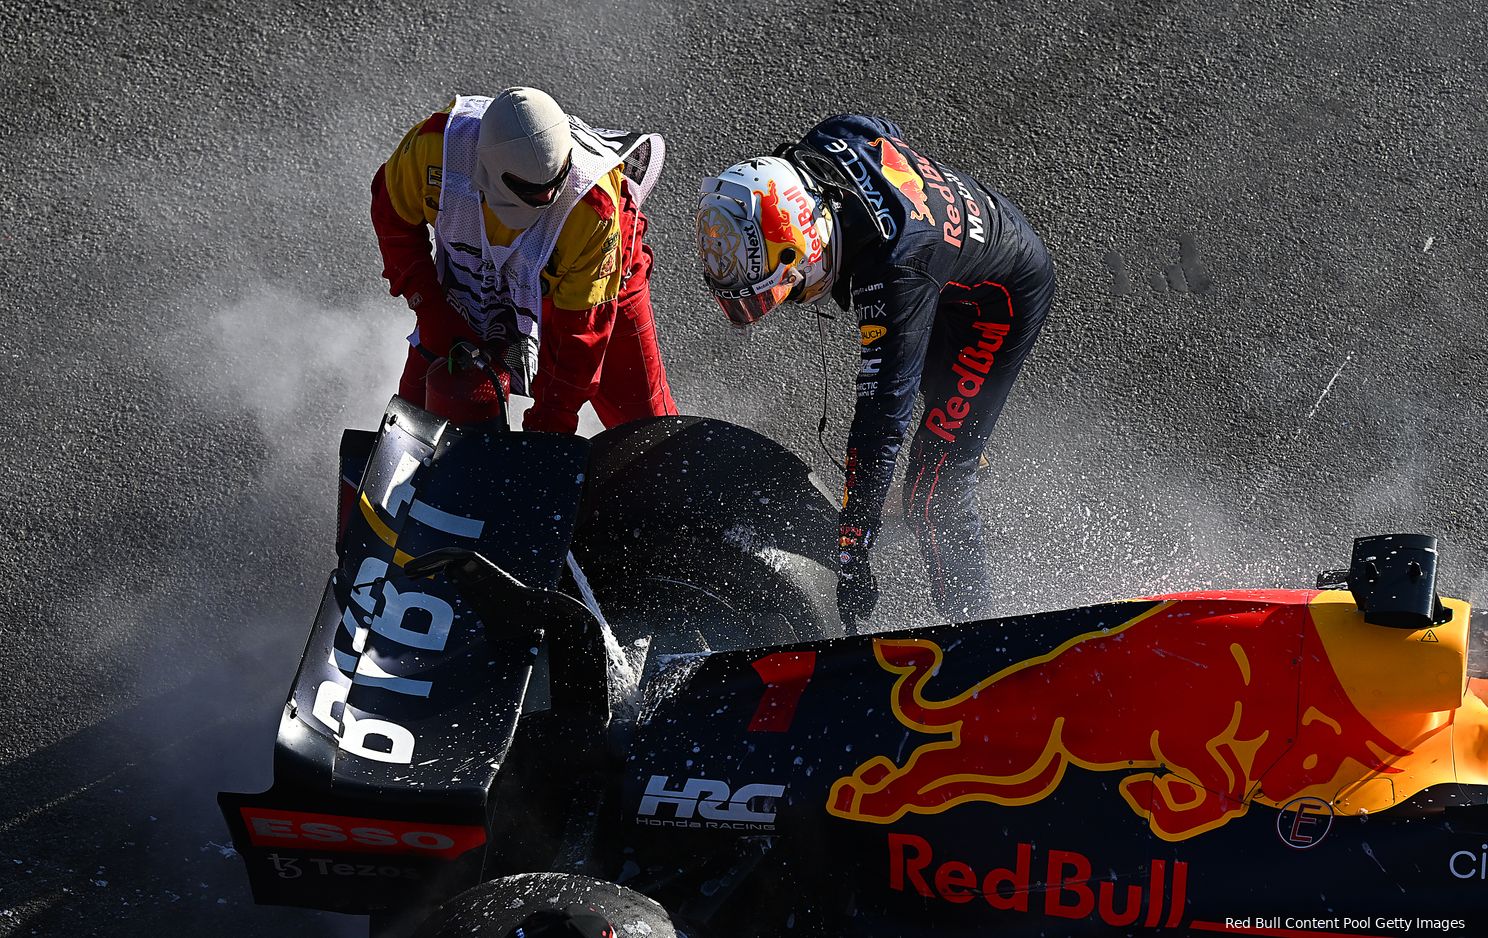 Max Verstappen spoke desperately about the situation at Red Bull Racing after two retirements in the first three races.  In this photo, he helps the marshal as his car, for the last time that year, was to be turned off.  (Photo: Red Bull content pool/Getty Images)